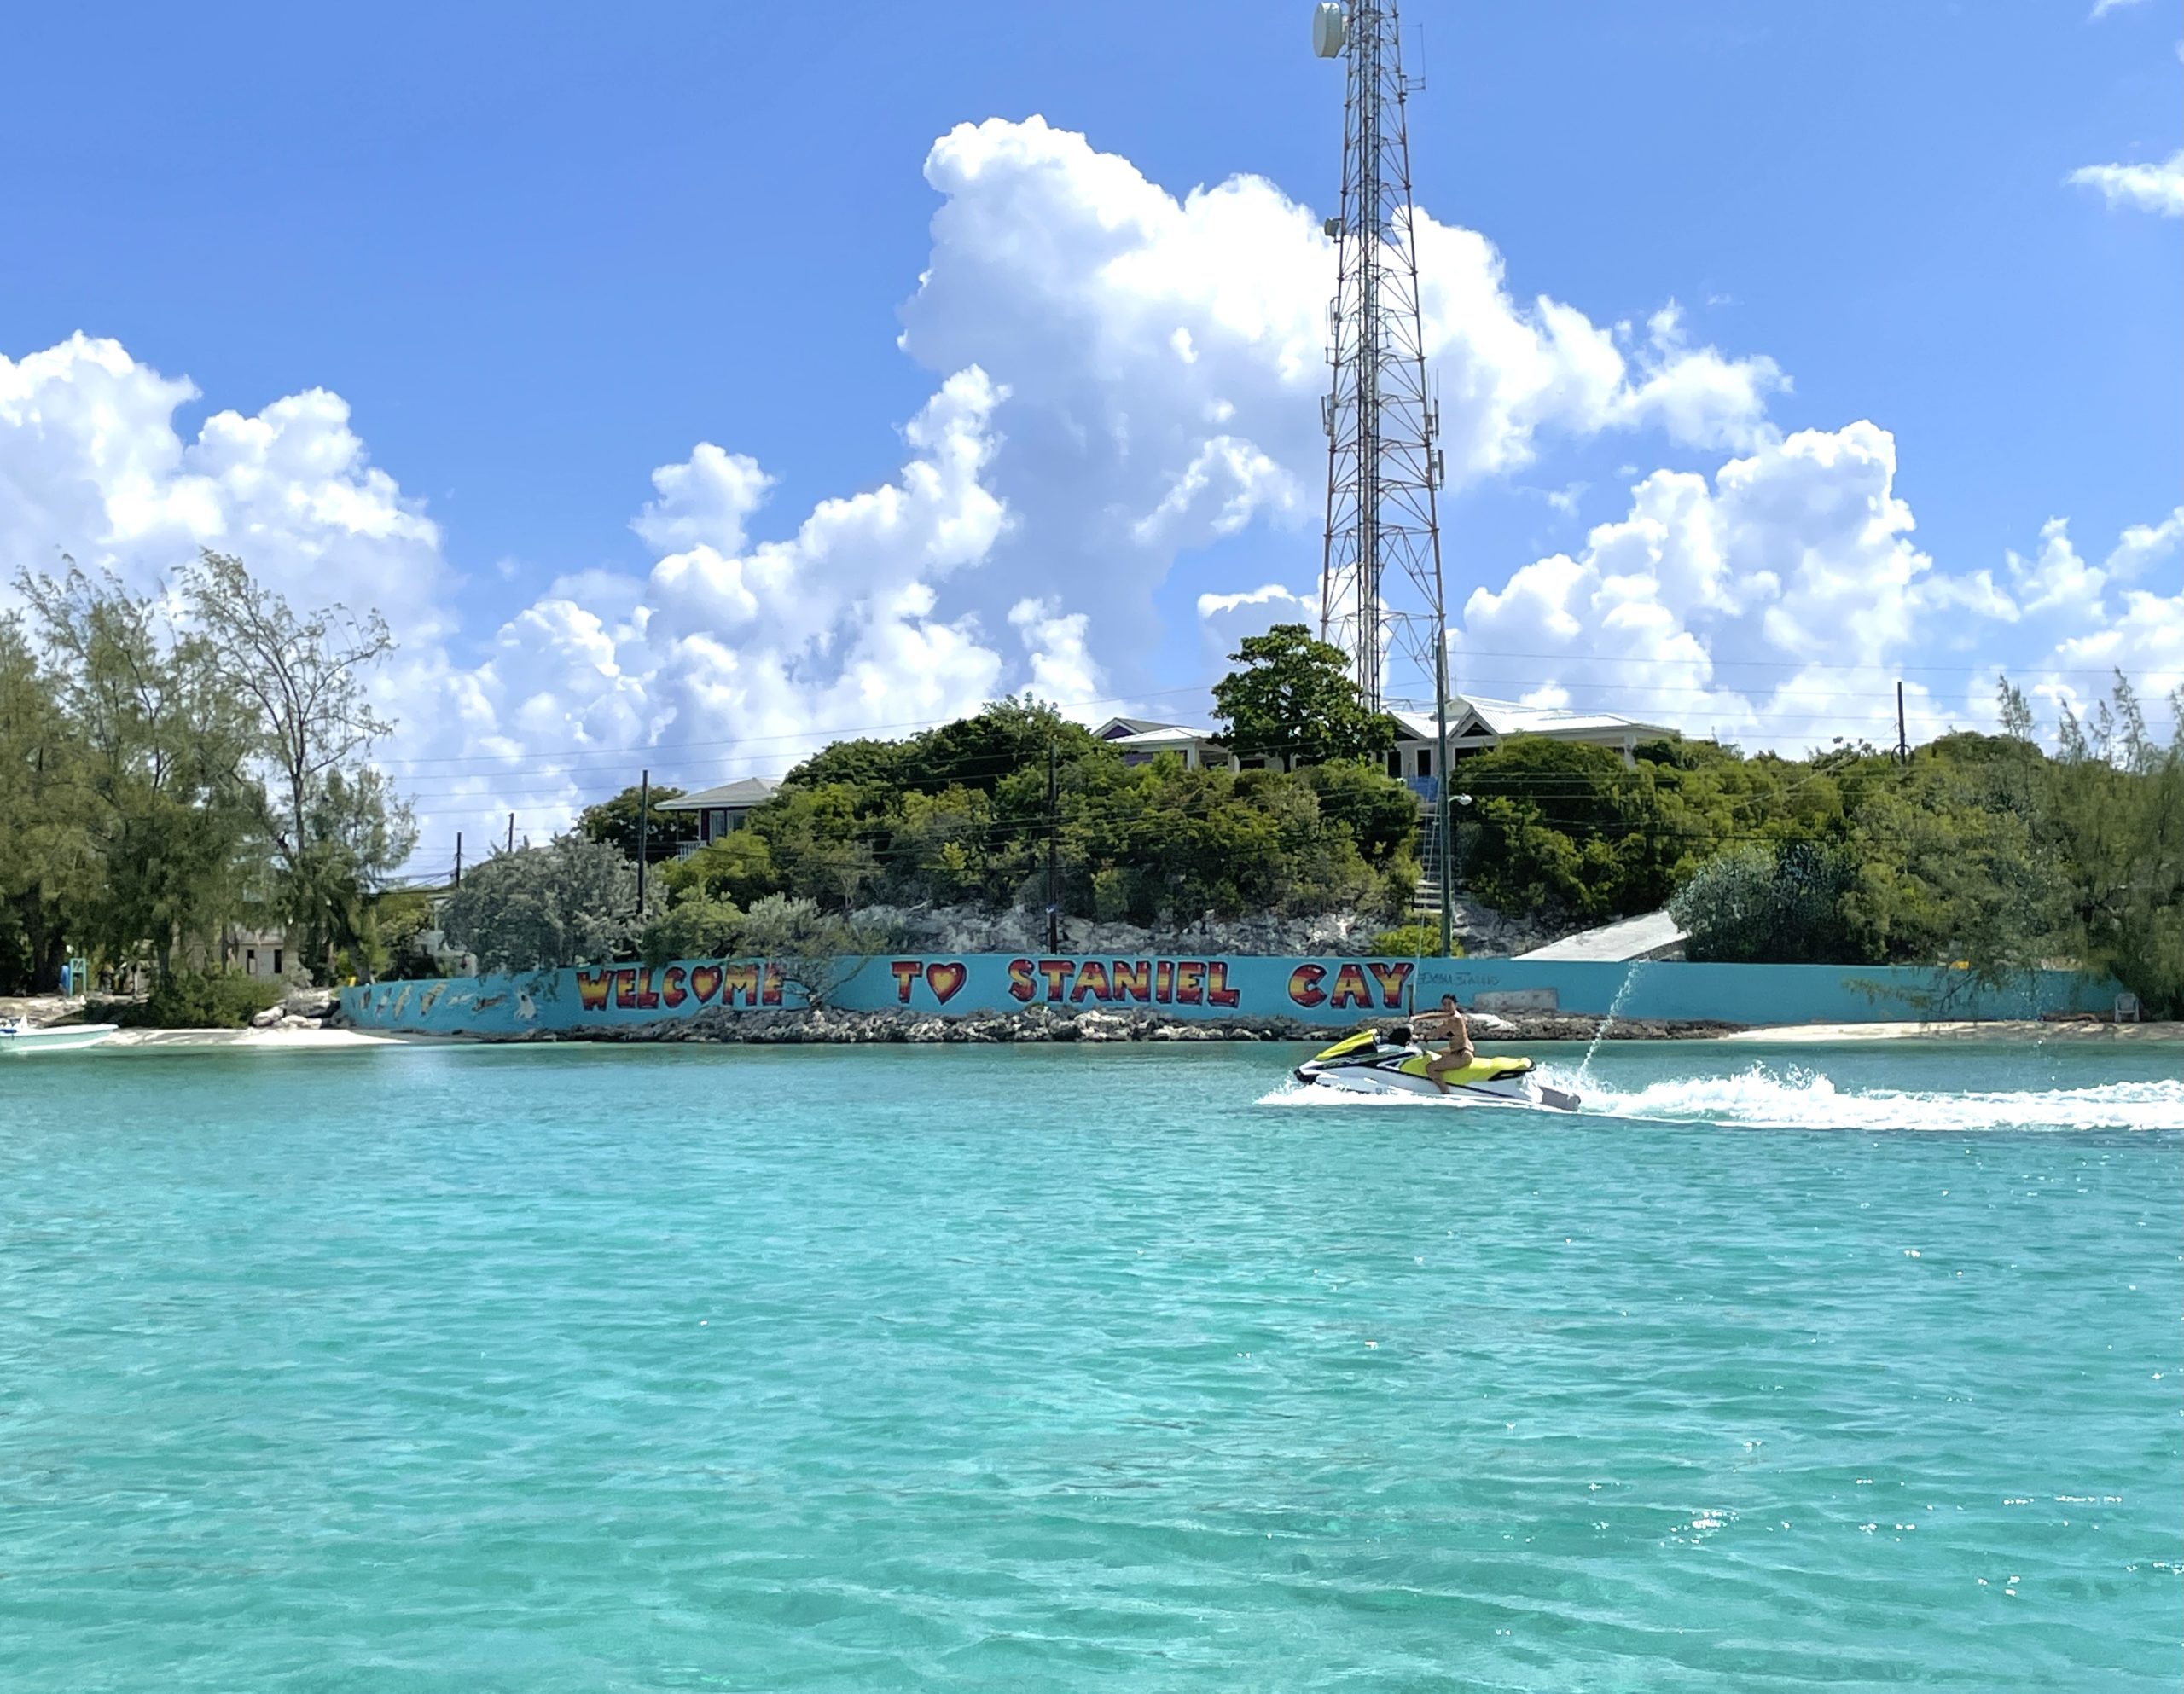 Things to do in Staniel Cay - Rent Jetskis